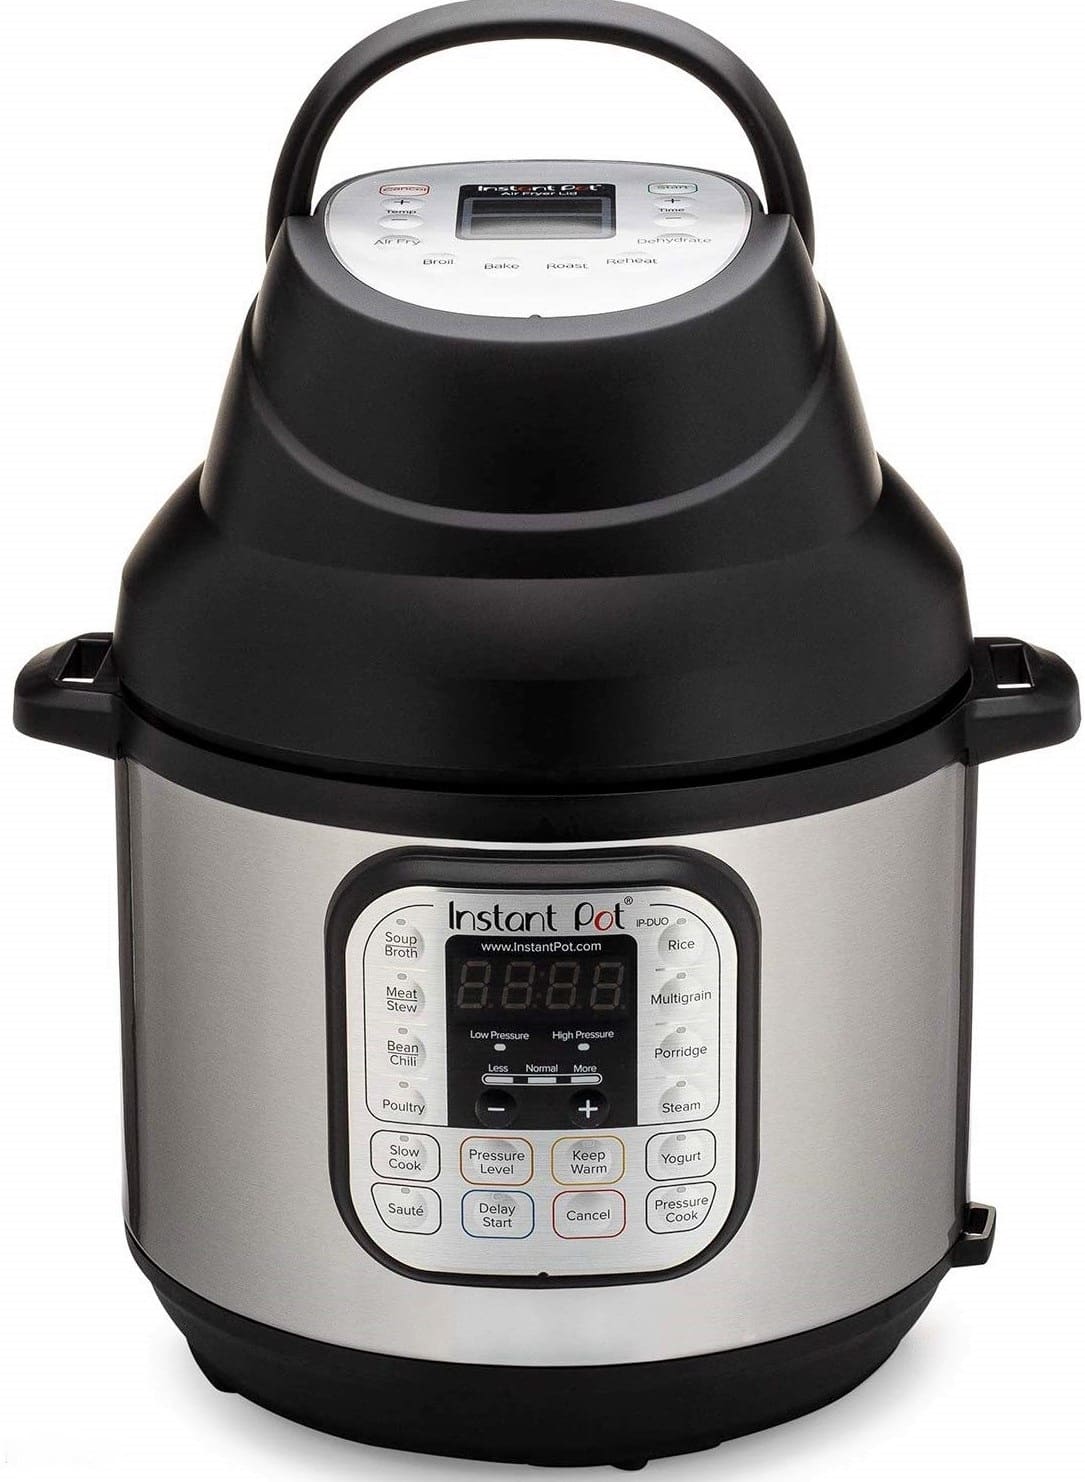 MOOSOO Pressure Cooker 6 QT Air Fryer Lid for Instant Pot 1300W 95% Less Oil & Knob Control Easy To Use With Deluxe Accessory Set Turn Your Electric Pressure Cooker Into Air Frye 